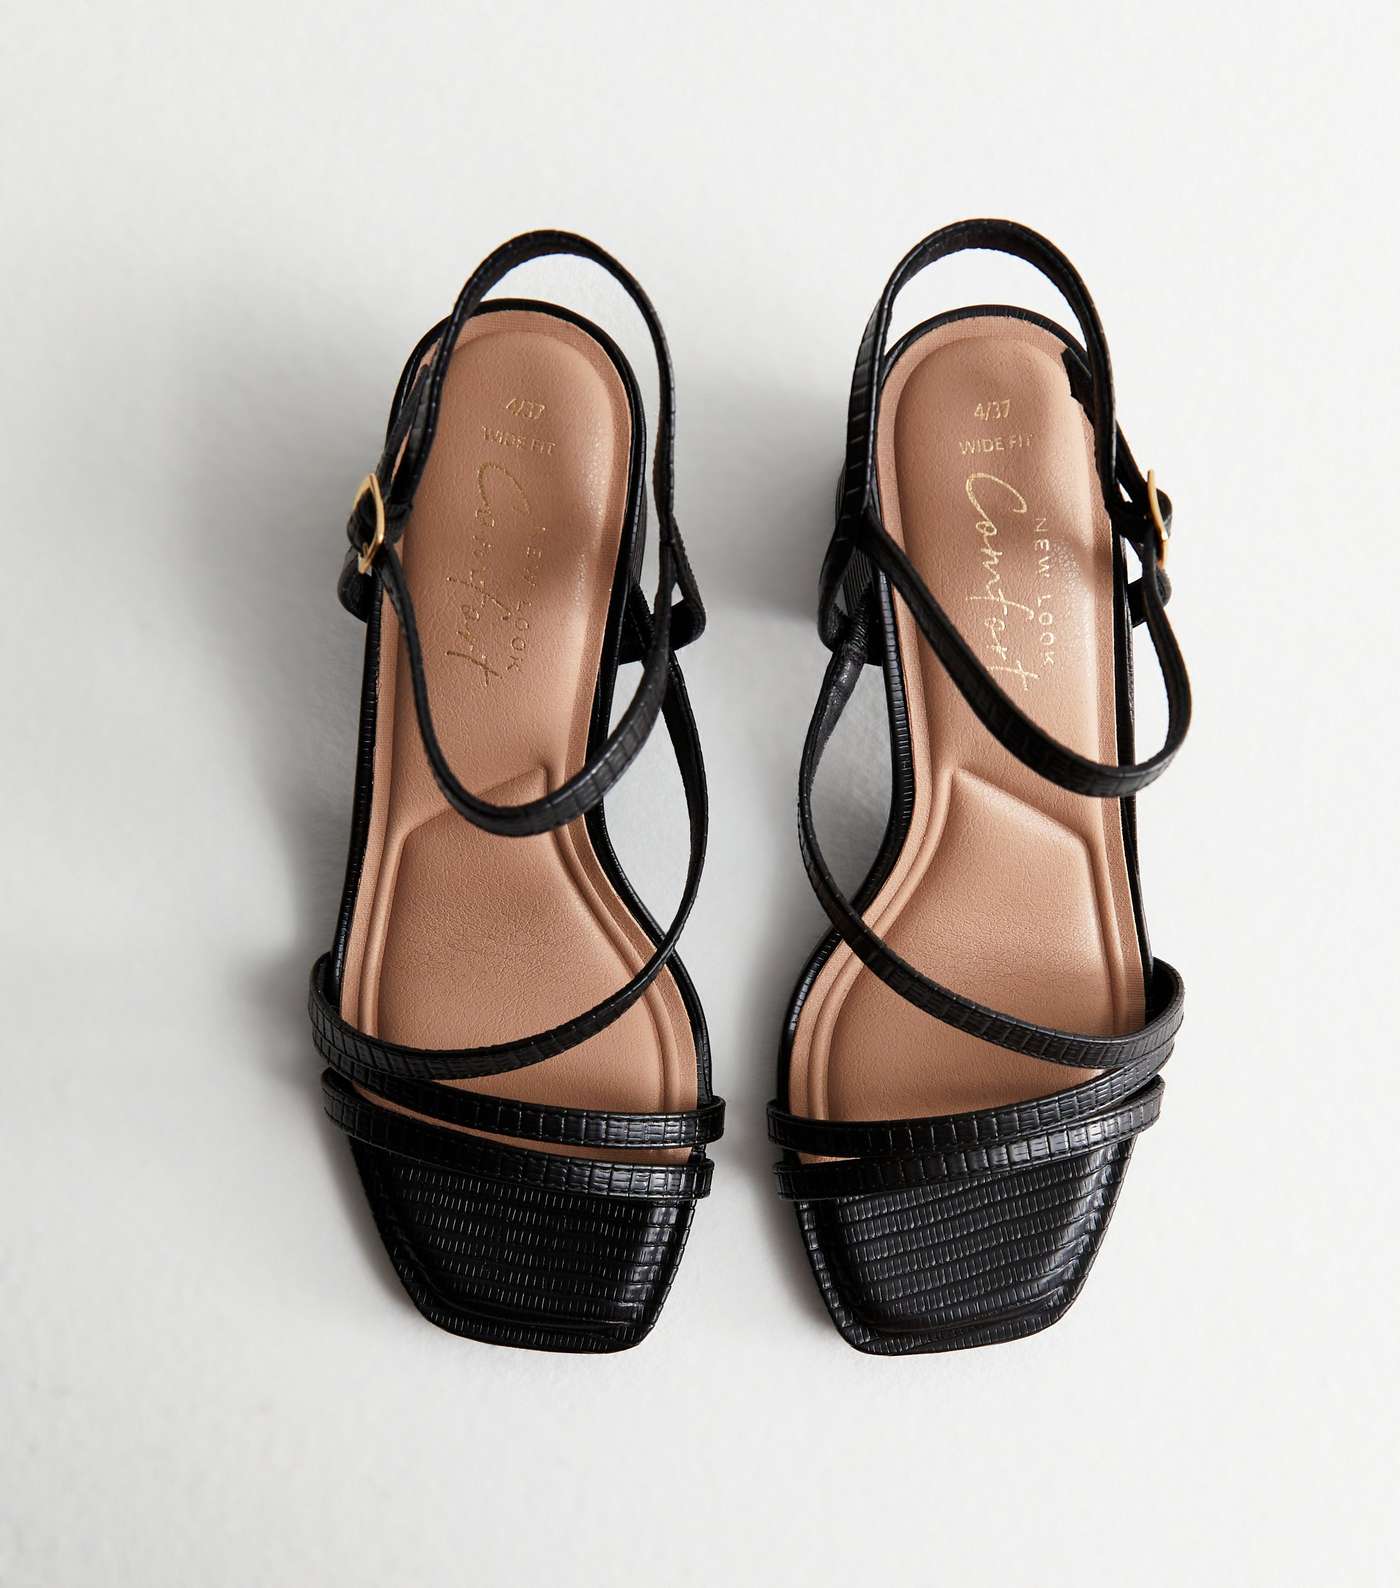 Wide Fit Black Leather-Look Strappy Block Heel Sandals Image 4